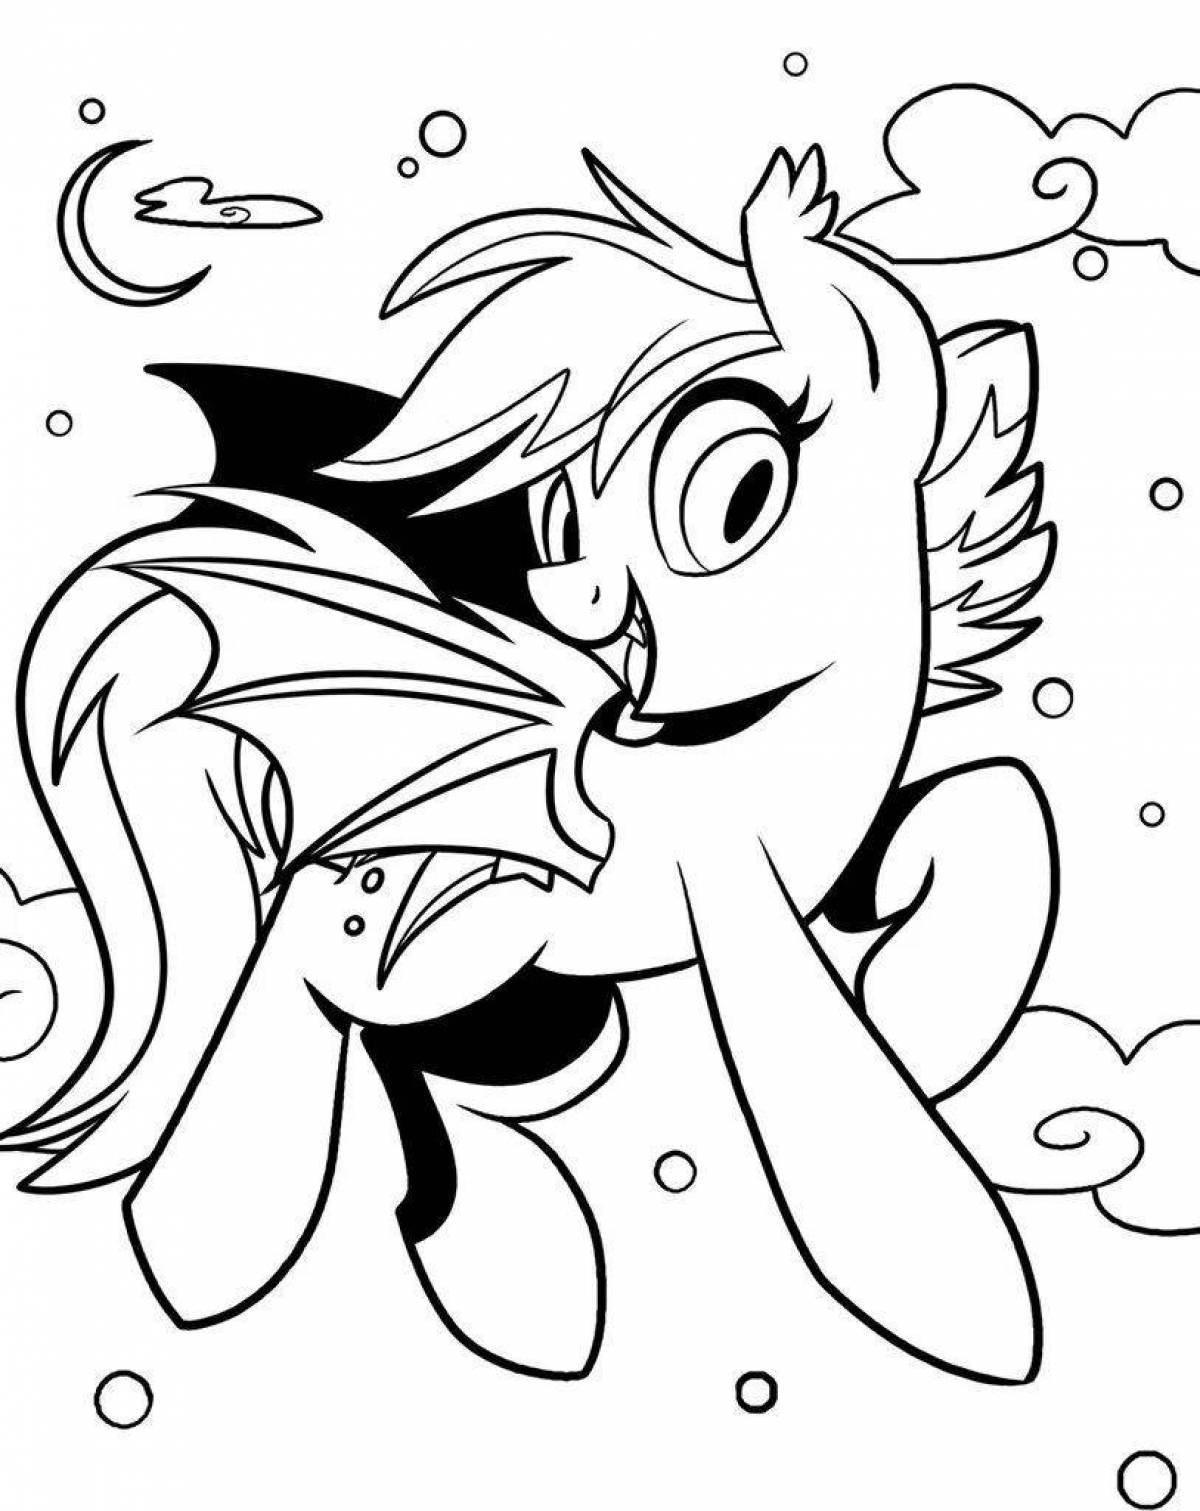 Shimmering my little pony mermaid coloring book